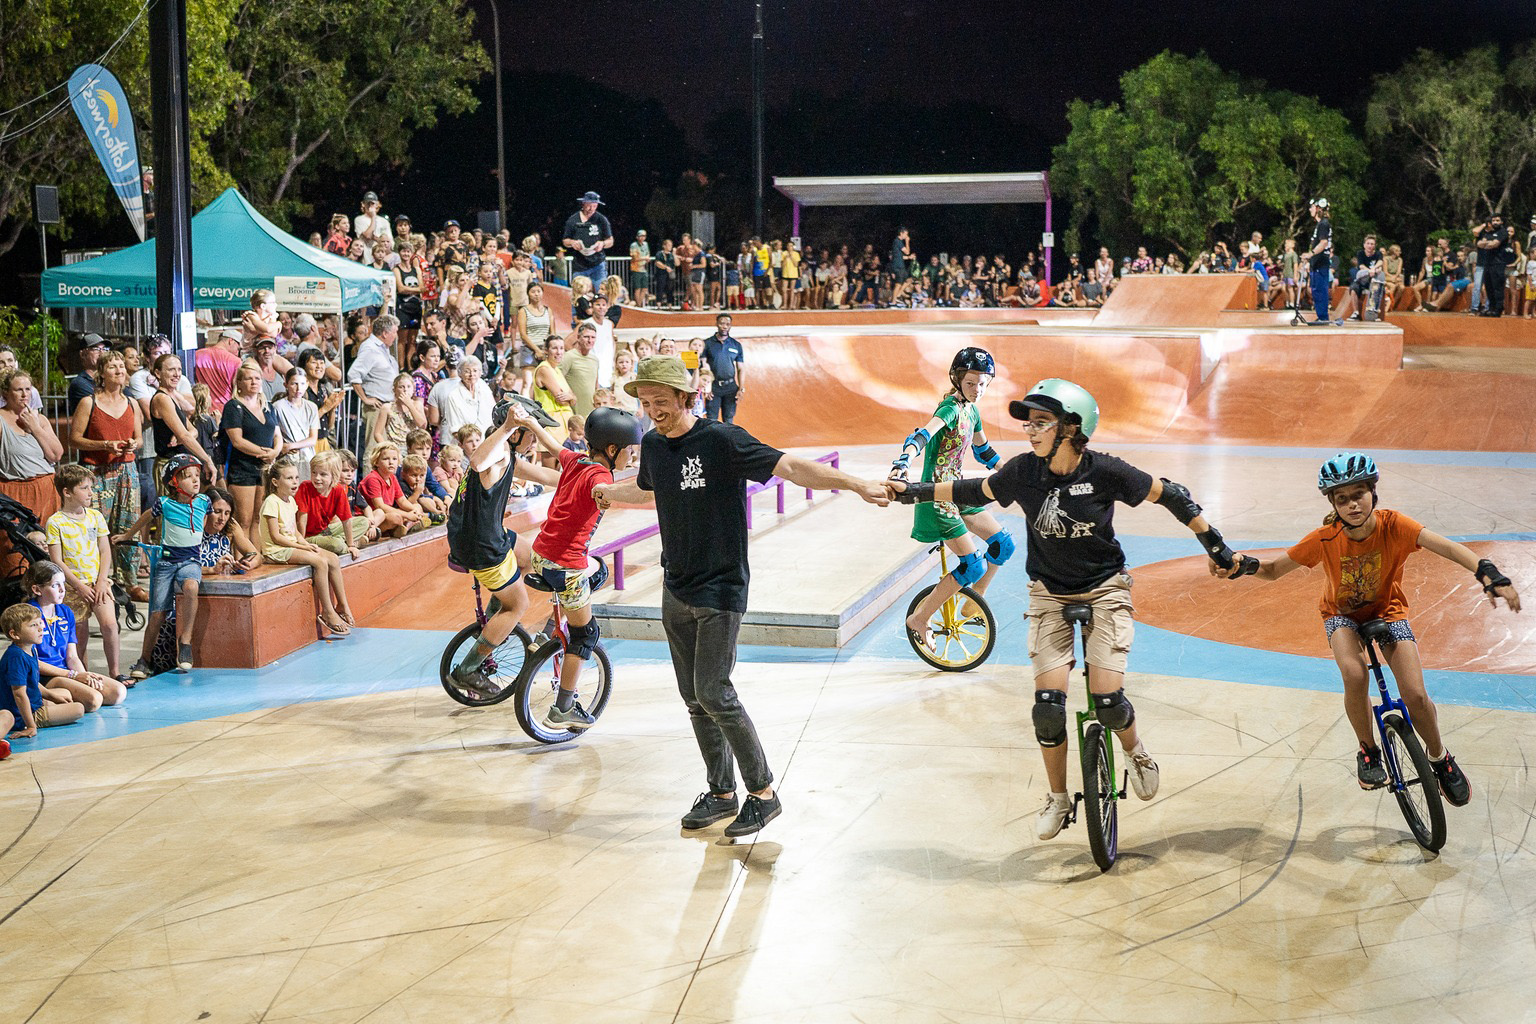 A instructor leads several unicyclists through a demonstration at Broome Skate Park in front of a large crowd.